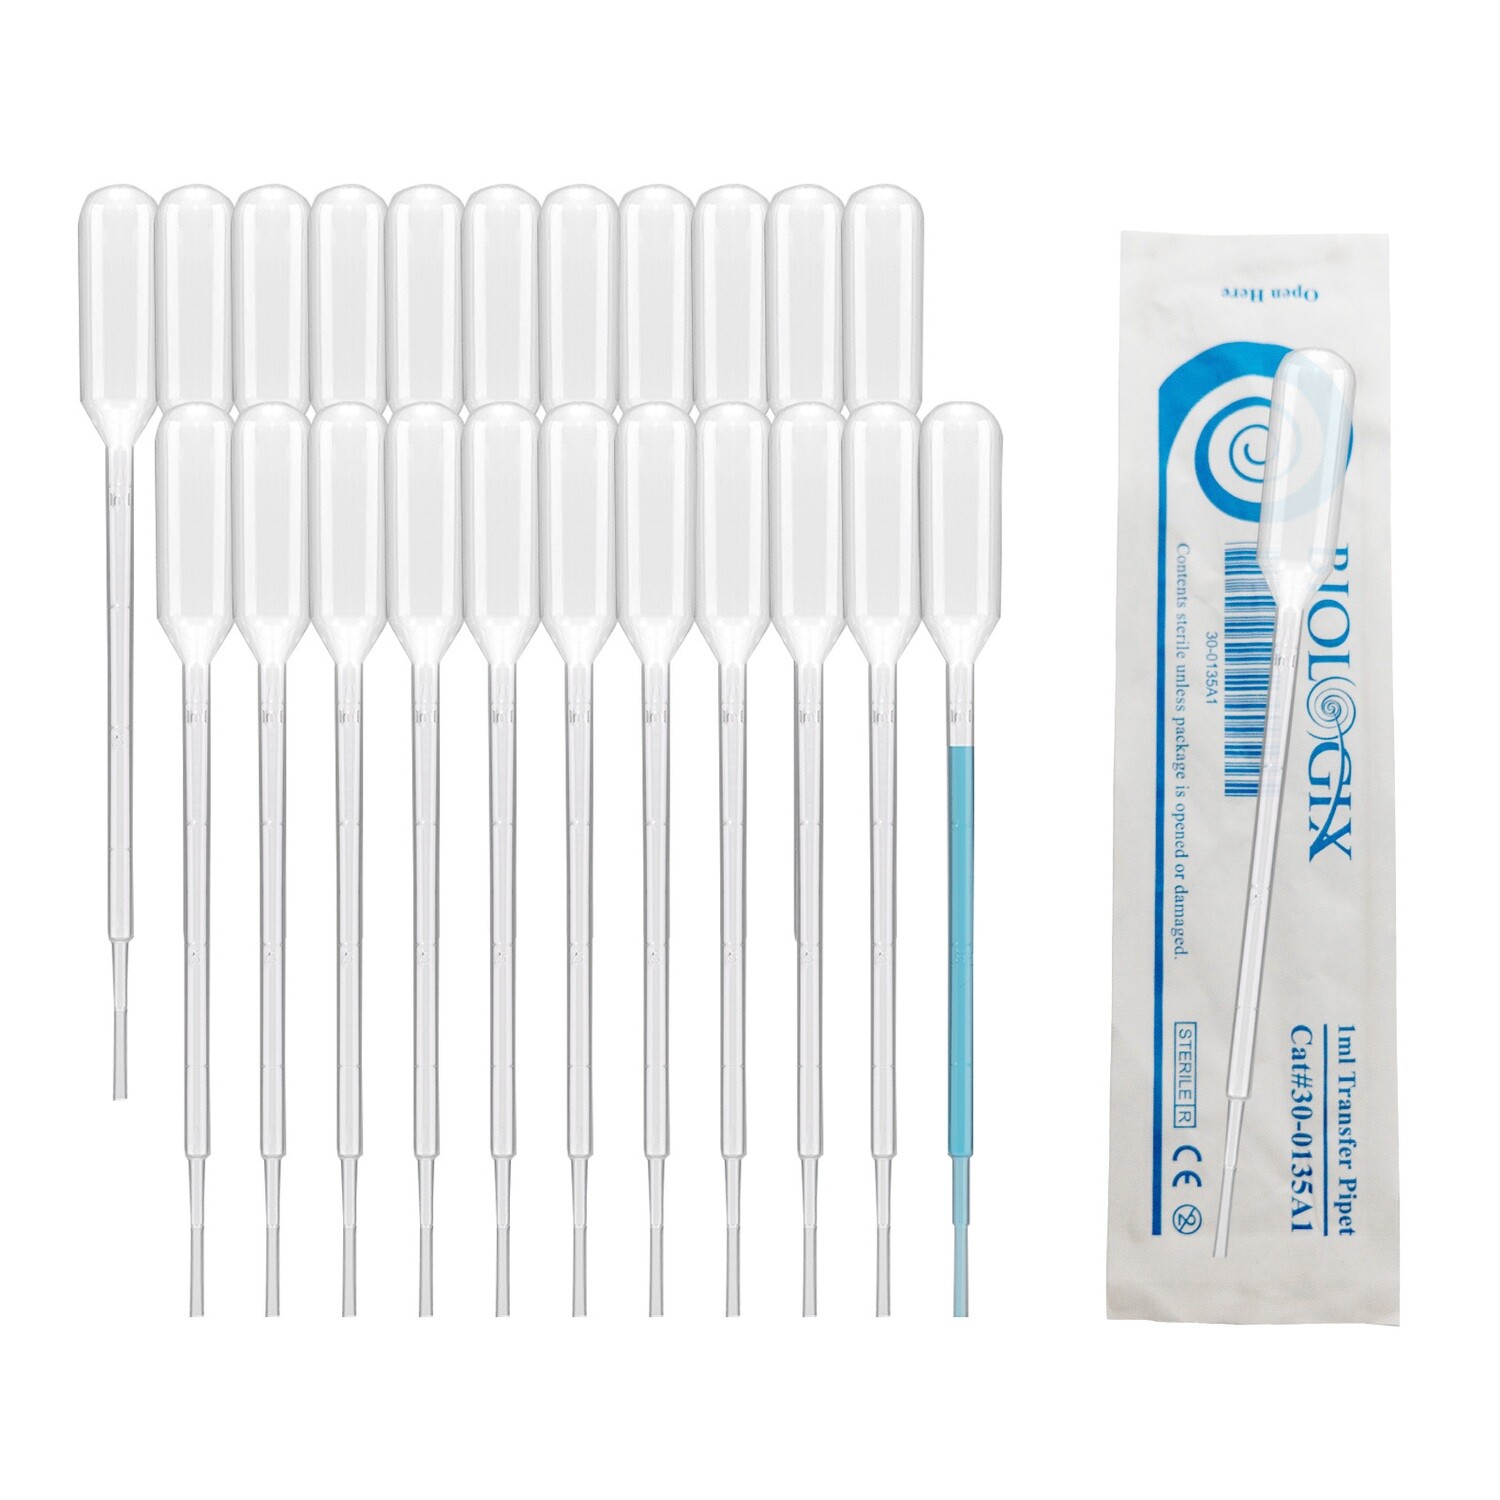 Biologix 1ml 3ml Transfer Pipettes, Individually Wrapped, 500/Pack, 2000/Case